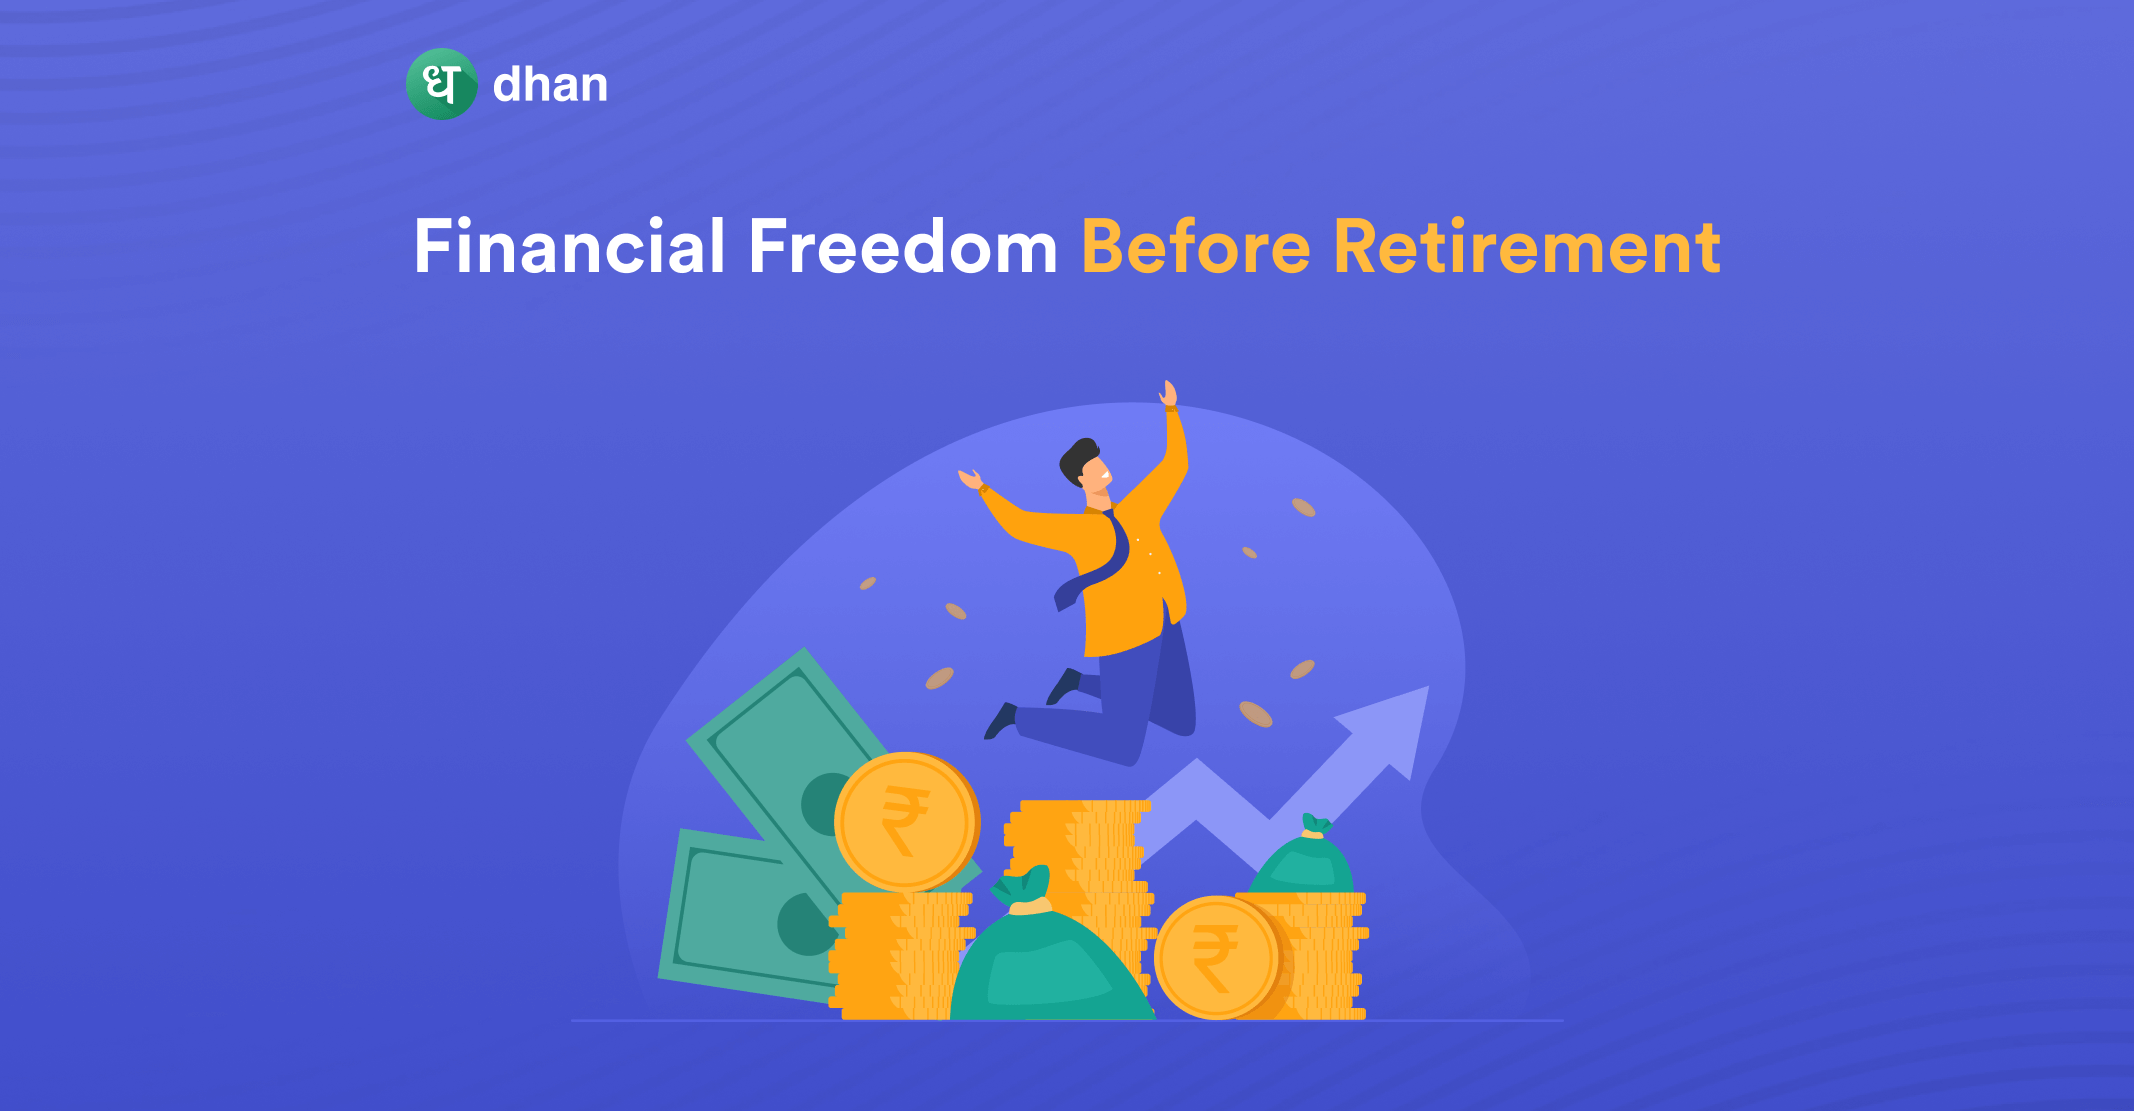 How To Achieve Financial Freedom Before Retirement